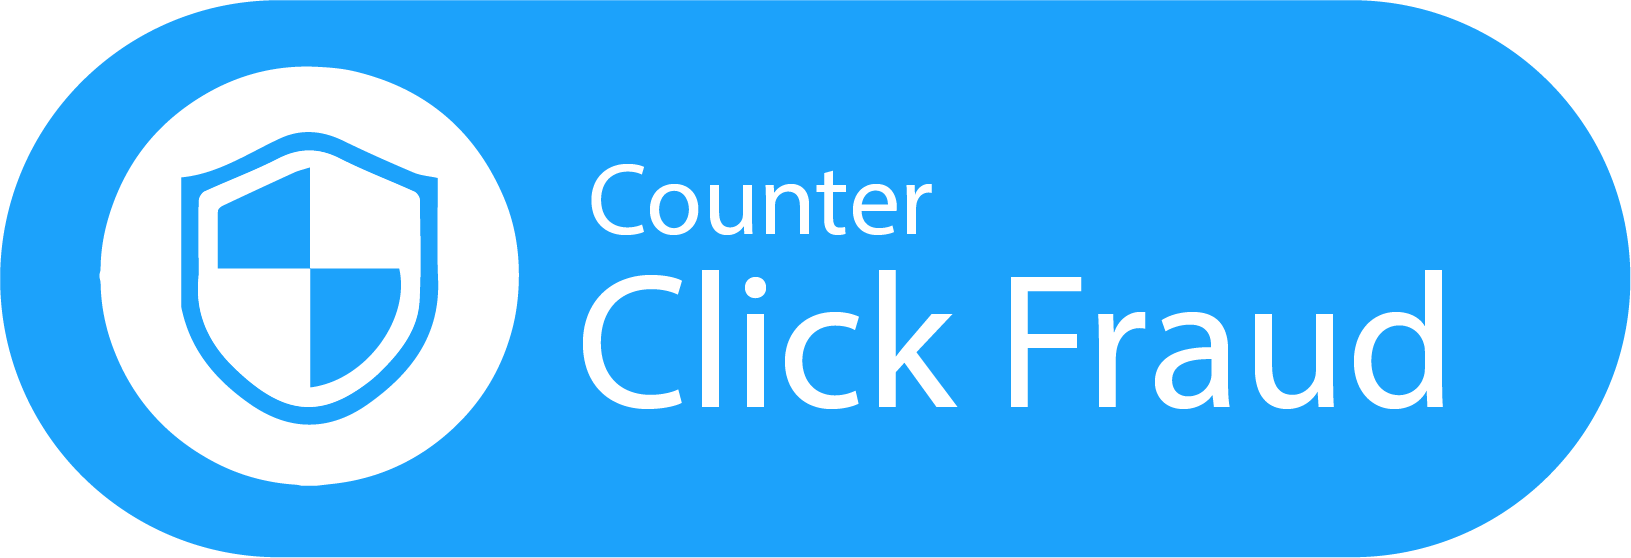 Counter Click Fraud